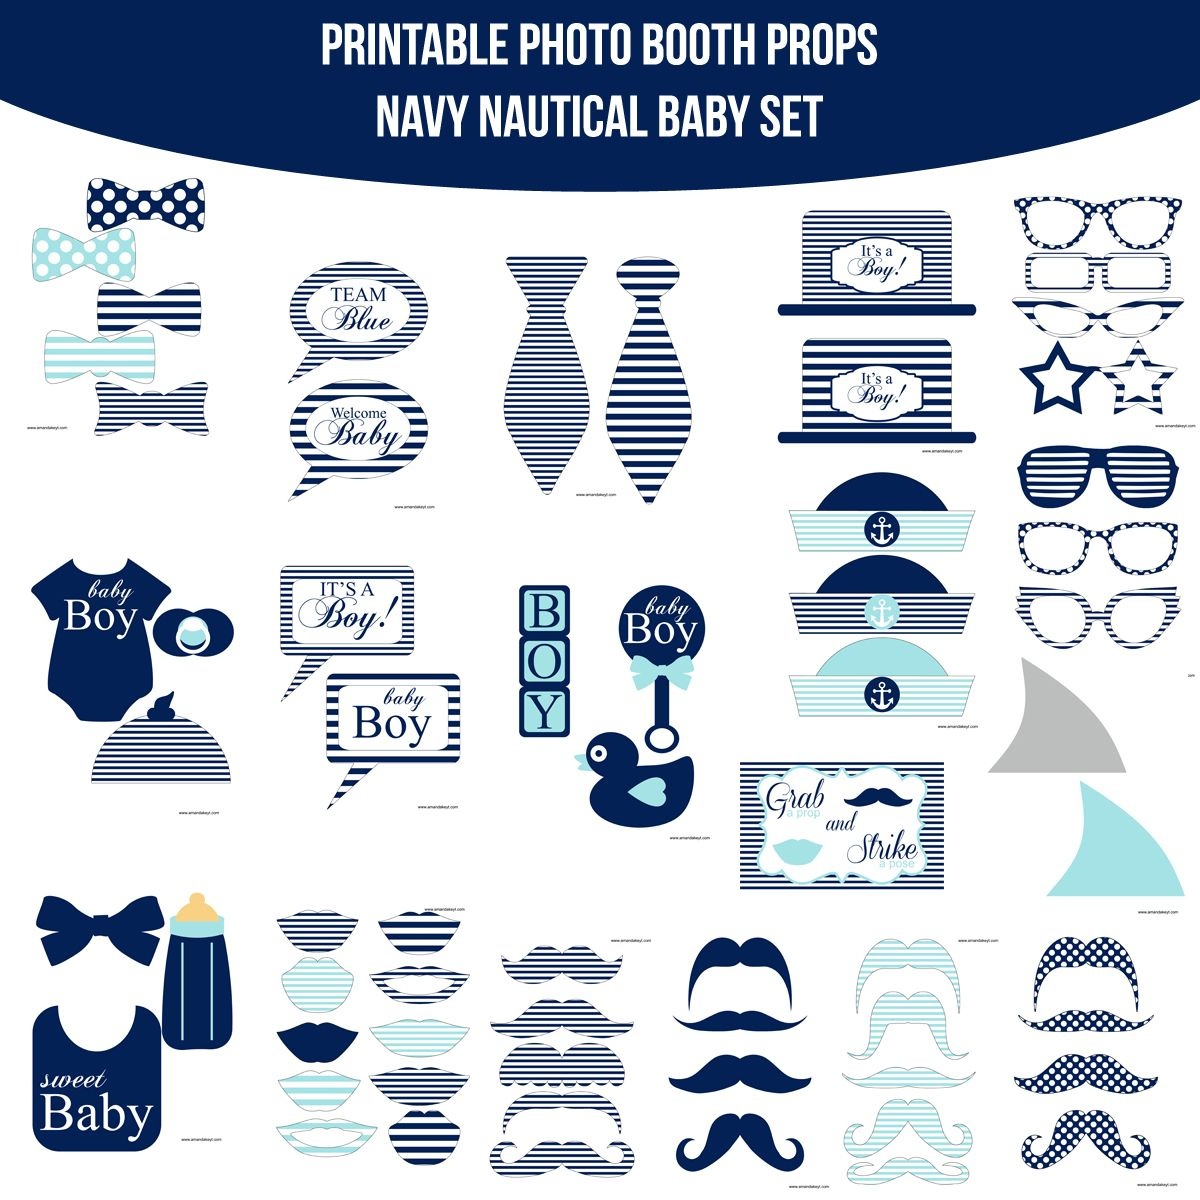 Instant Download Baby Nautical Navy Printable Photo Booth Prop Set - Free Printable Baby Shower Photo Booth Props